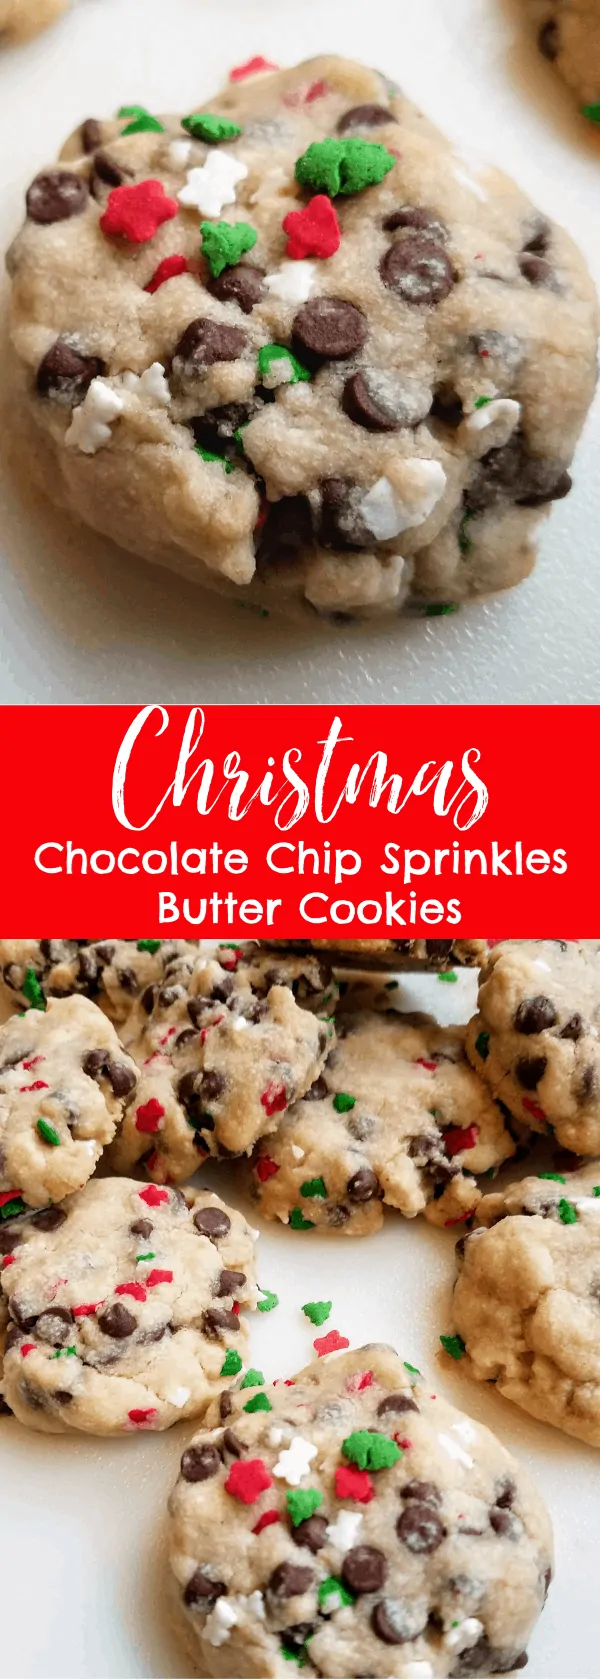 https://mooreorlesscooking.com/wp-content/uploads/2018/12/Christmas-Chocolate-Chip-Sprinkles-Butter-Cookies.png.webp